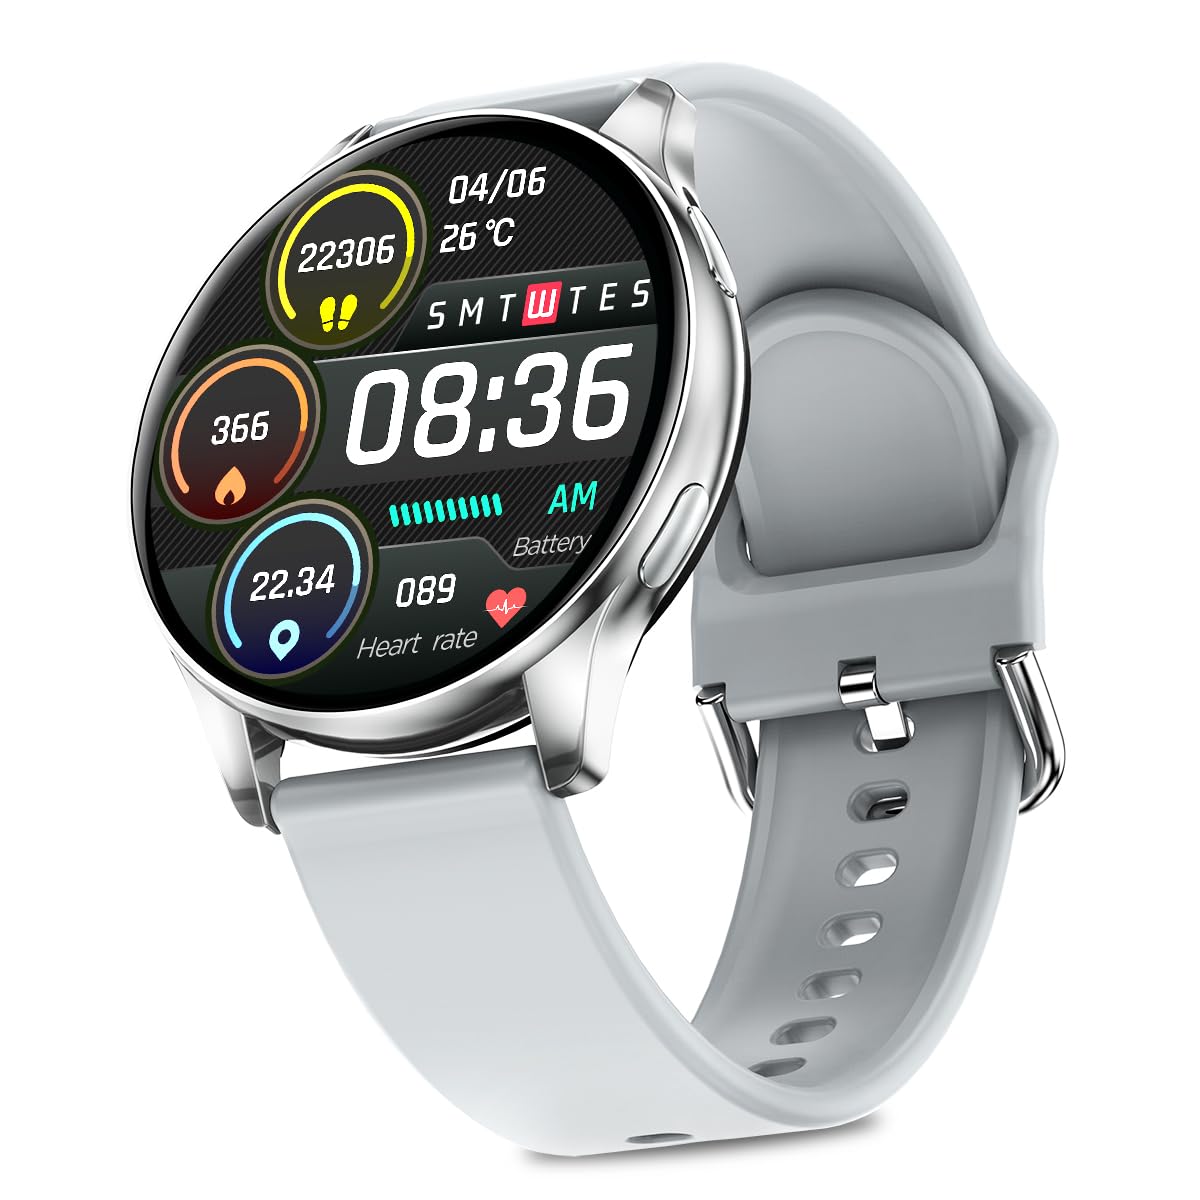 pTron Newly Launched Reflect Flash 1.32 inch Round Dial Smartwatch, Bluetooth Calling, Full Touch Display, 600 NITS, Metal Frame, 100+ Watch Faces, HR, SpO2, Voice Assist & 5 Days Battery Life(Silver)